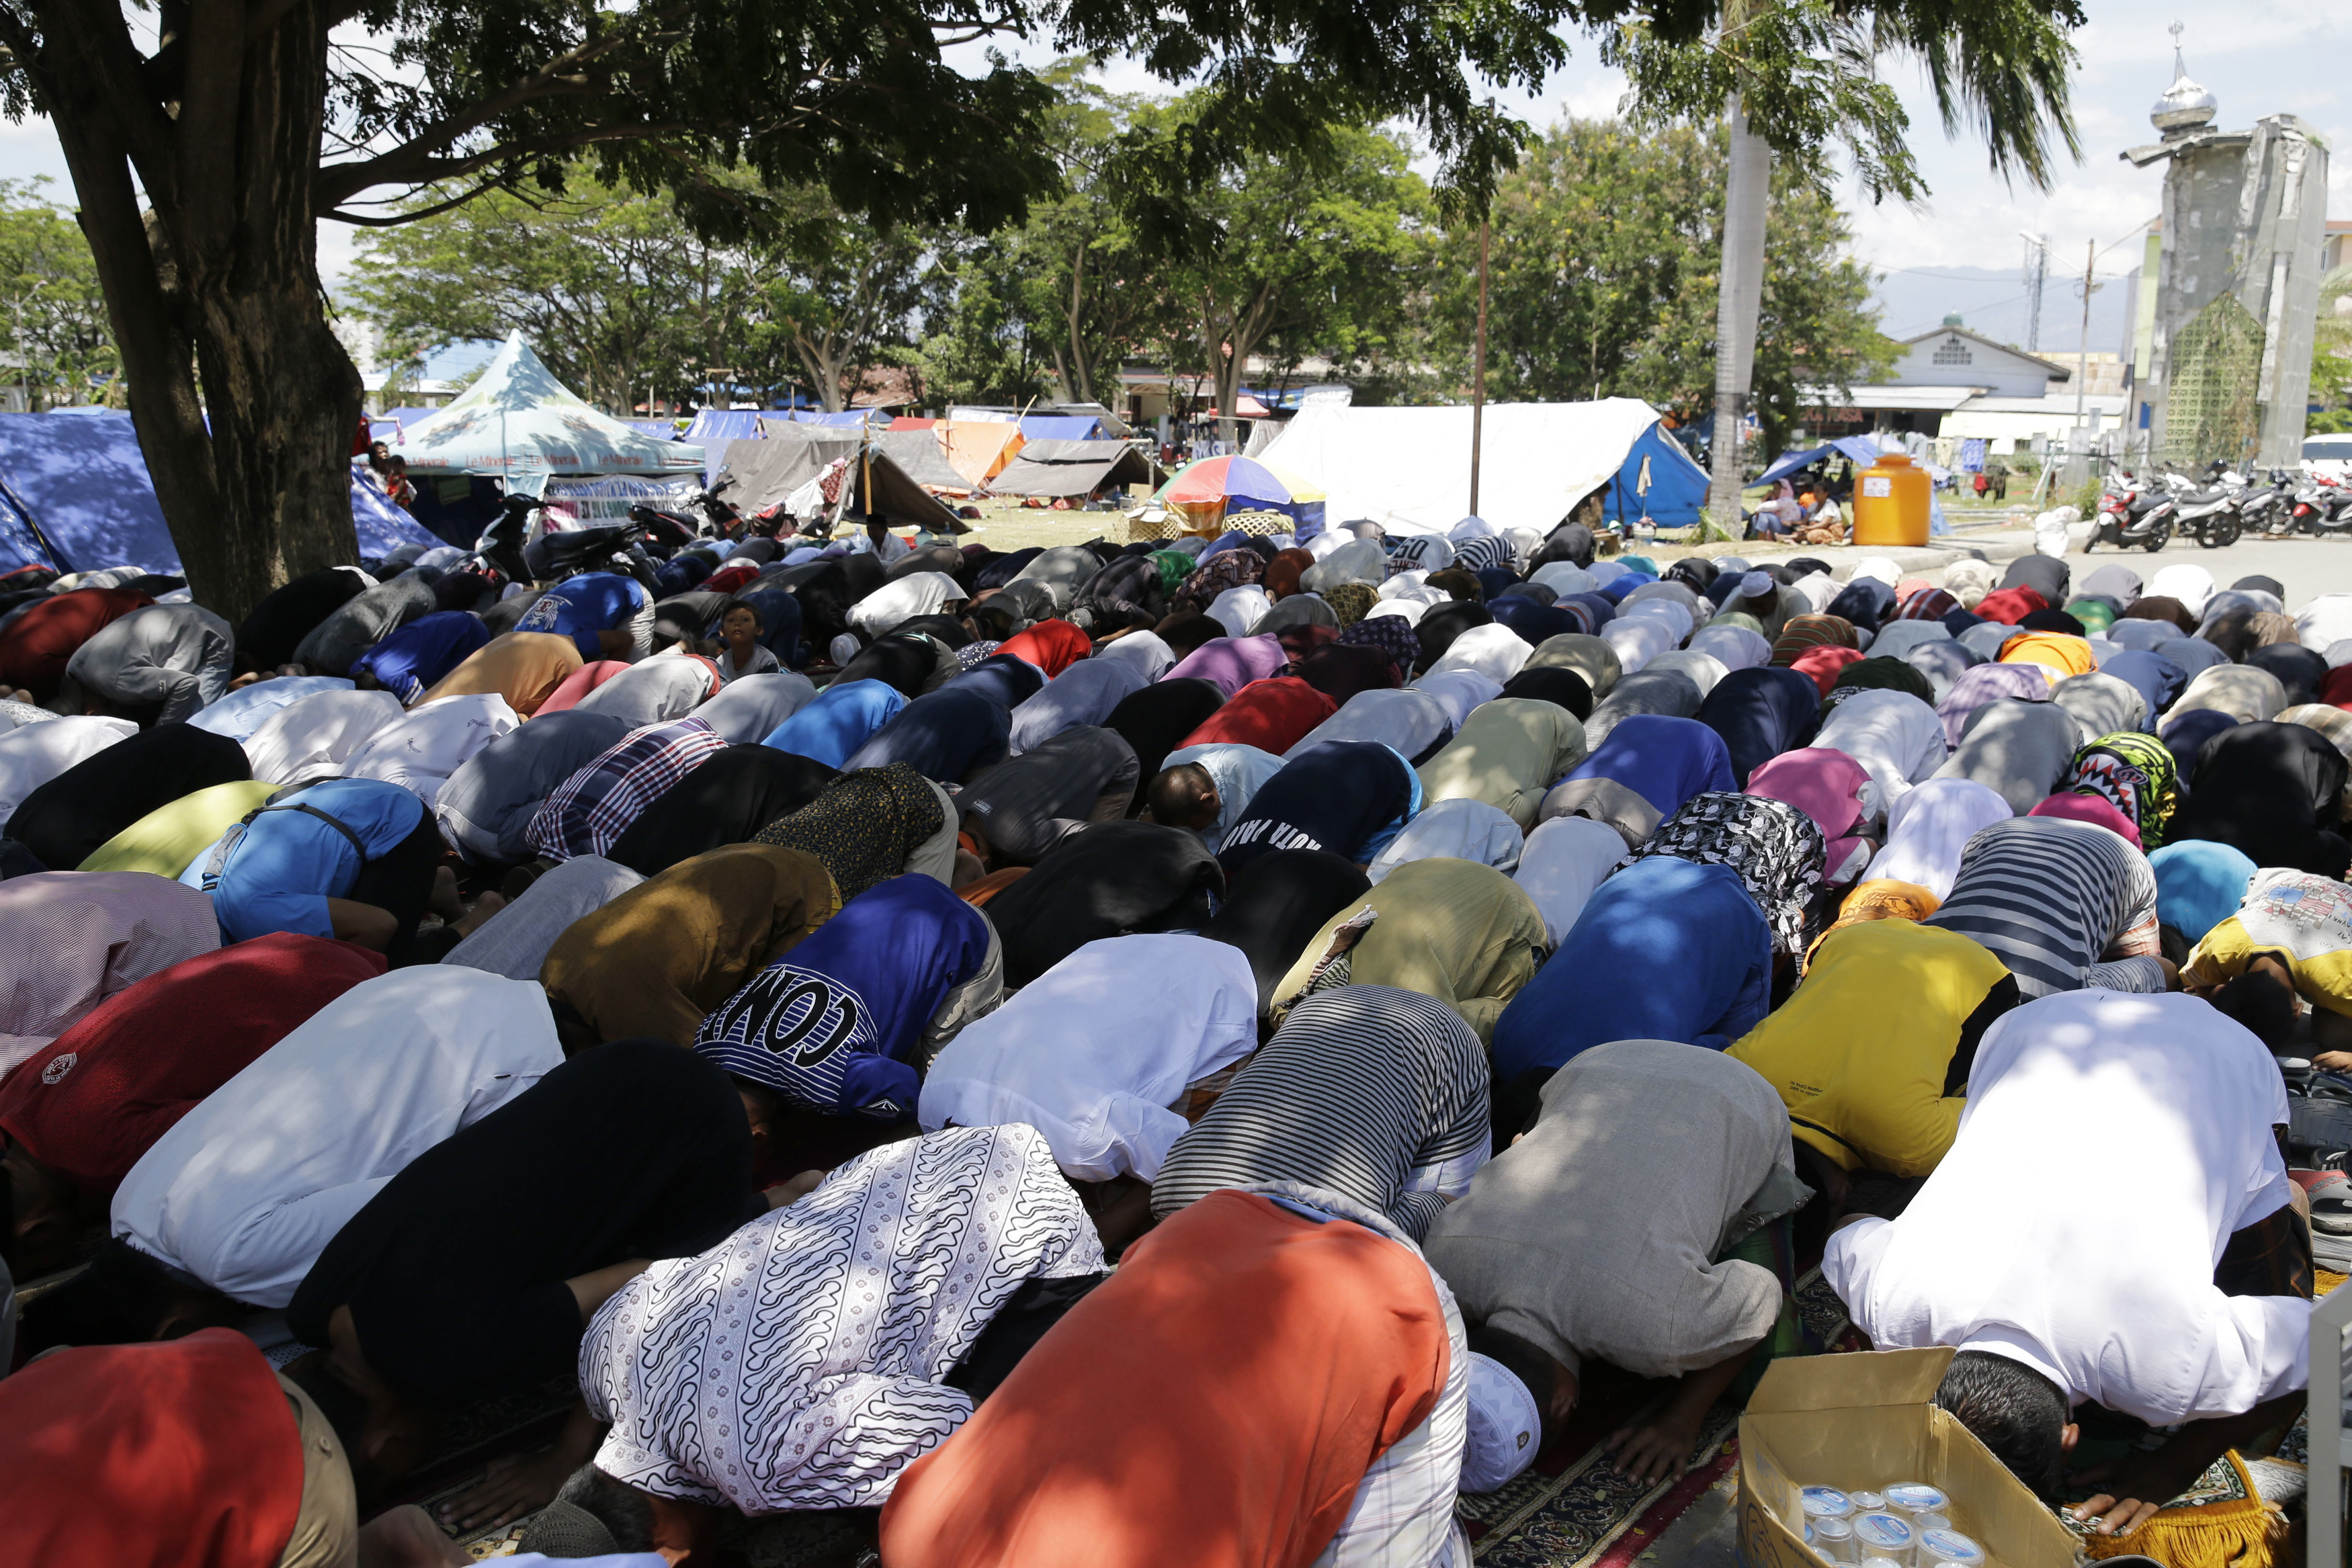 Evacuees pray near tents outside a damaged mosque caused by the massive earthquake and tsunami in Palu, Central Sulawesi, Indonesia Friday, Oct. 5, 2018. Hundreds of Muslim survivors in the Indonesian city of Palu gathered at shattered mosques for Friday prayers, seeking strength to rebuild their lives a week after a powerful earthquake and tsunami killed more than 1,500 people. (AP Photo/Aaron Favila)